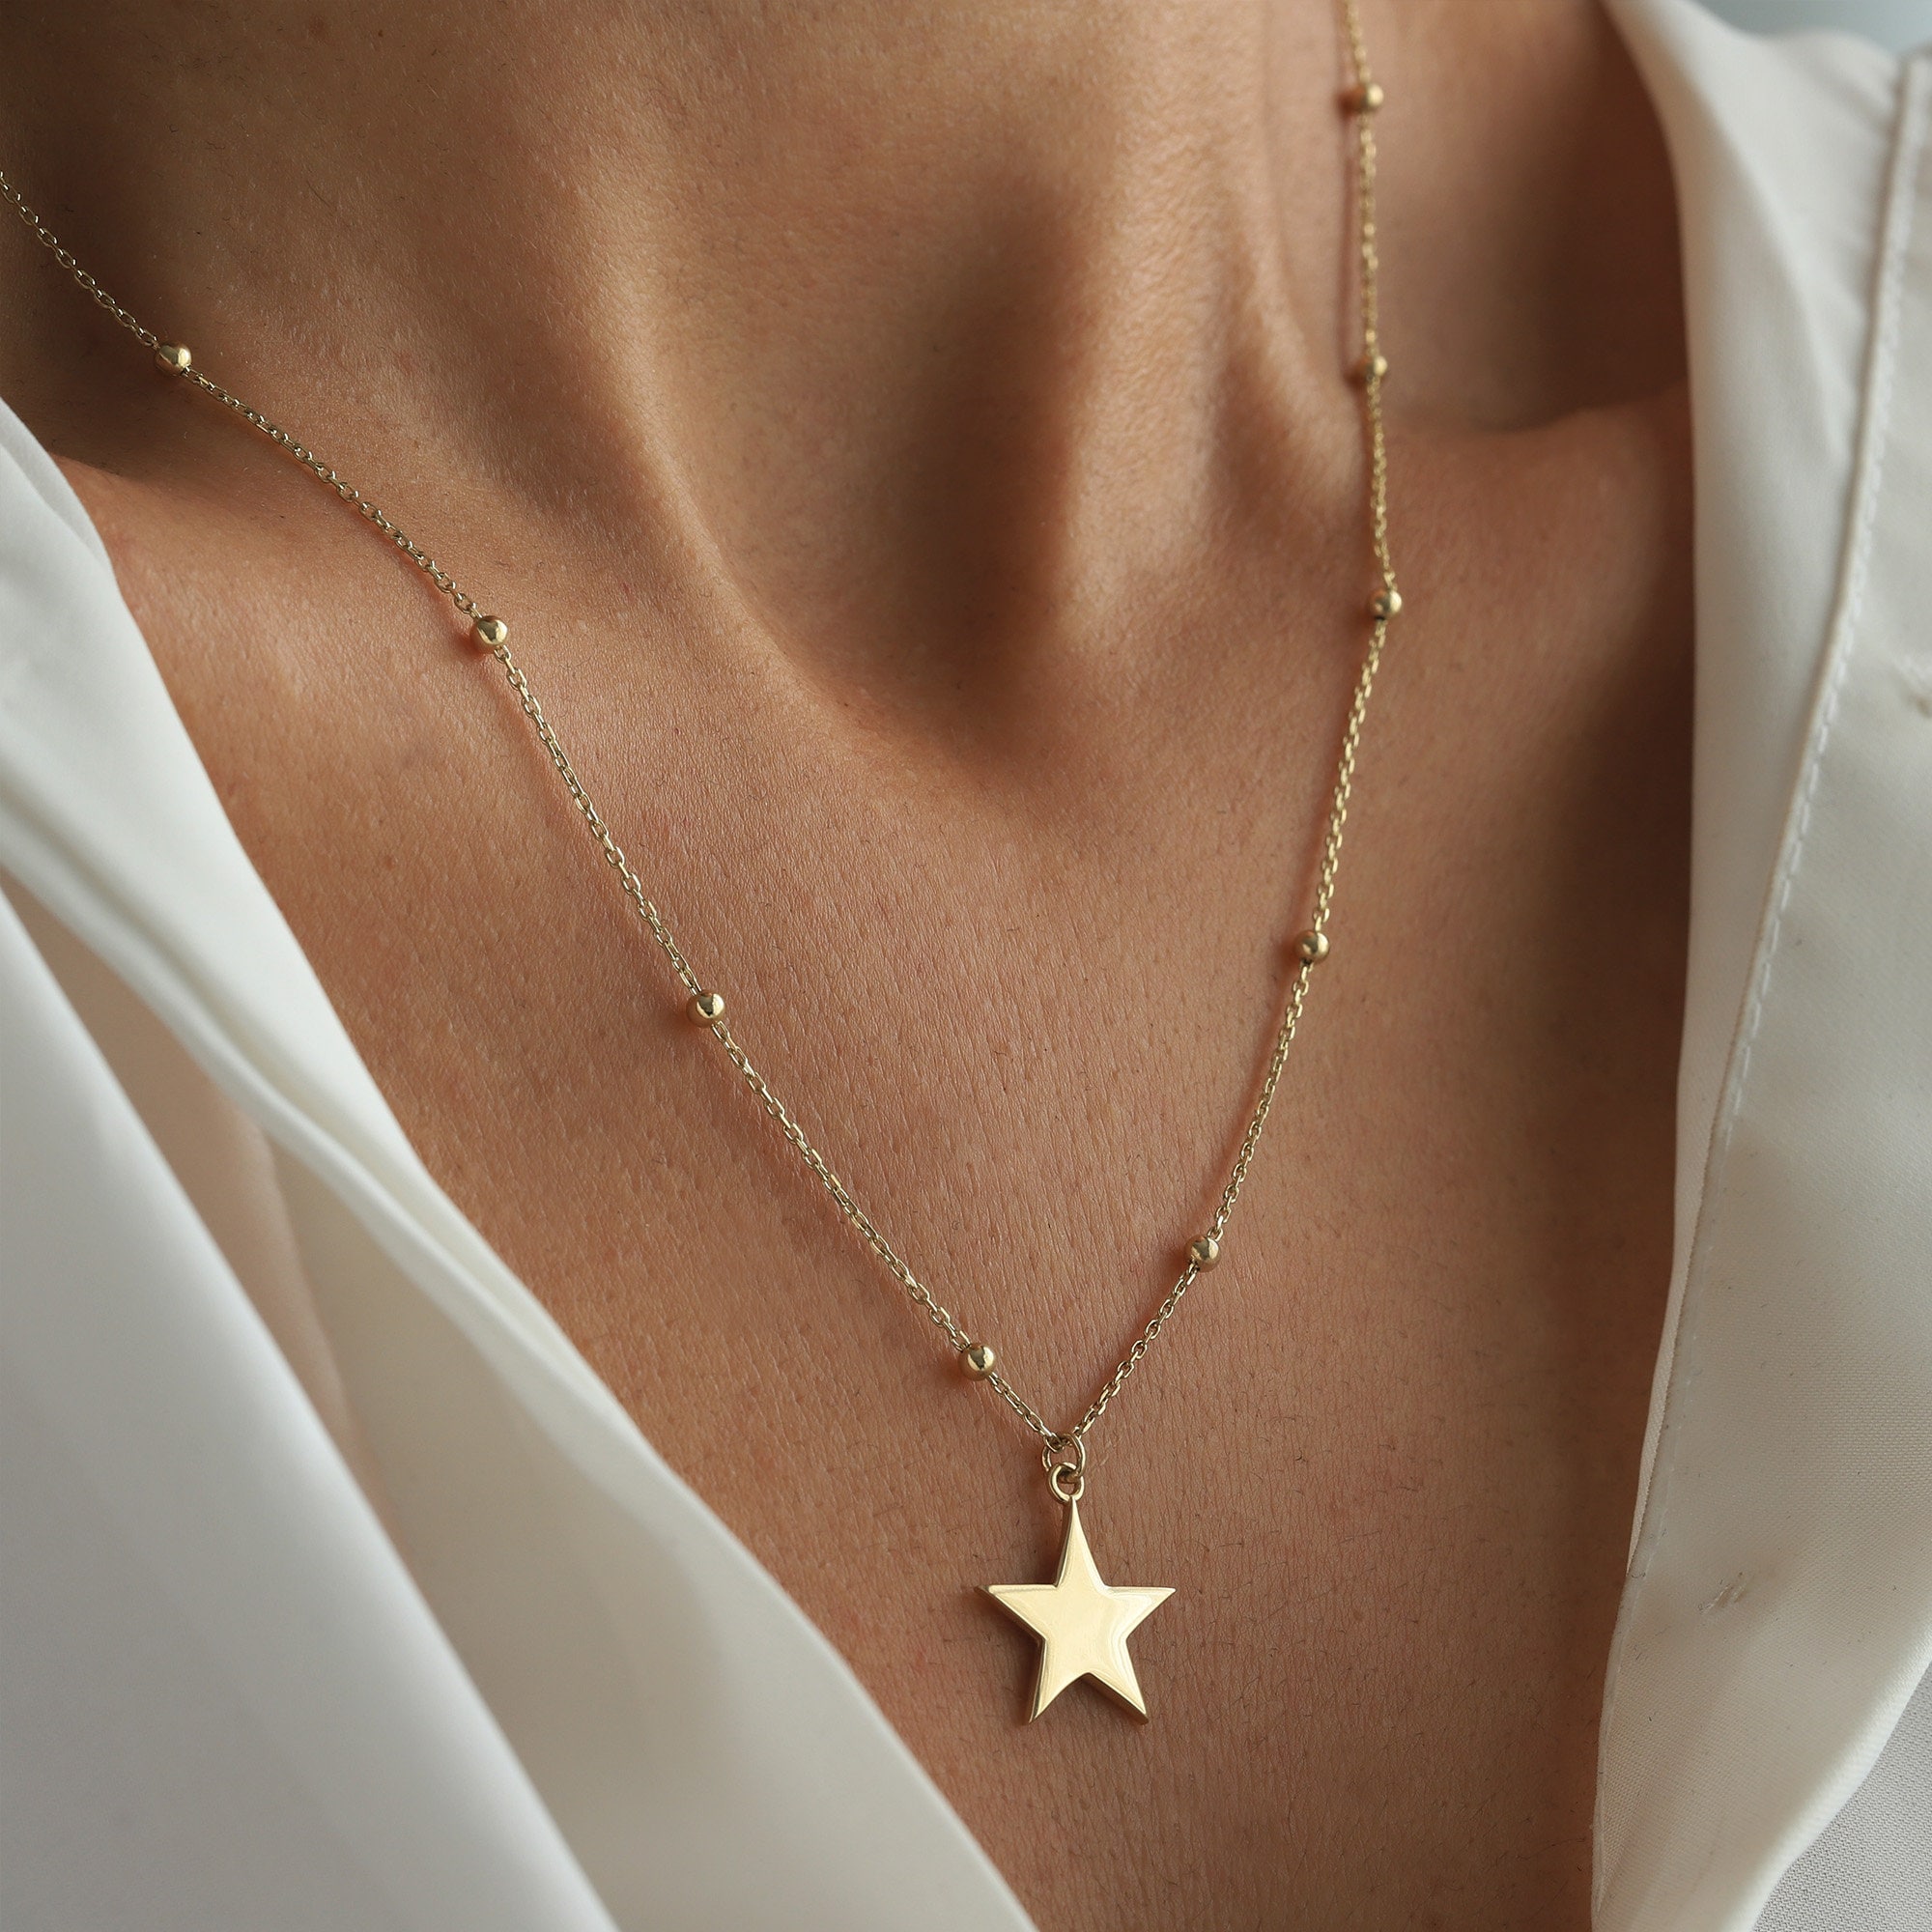 12x12mm 24k Gold Filled Star Charms, Gold Star Pendant, Celestial Jewelry  Minimalist Jewelry Making supply, D-683